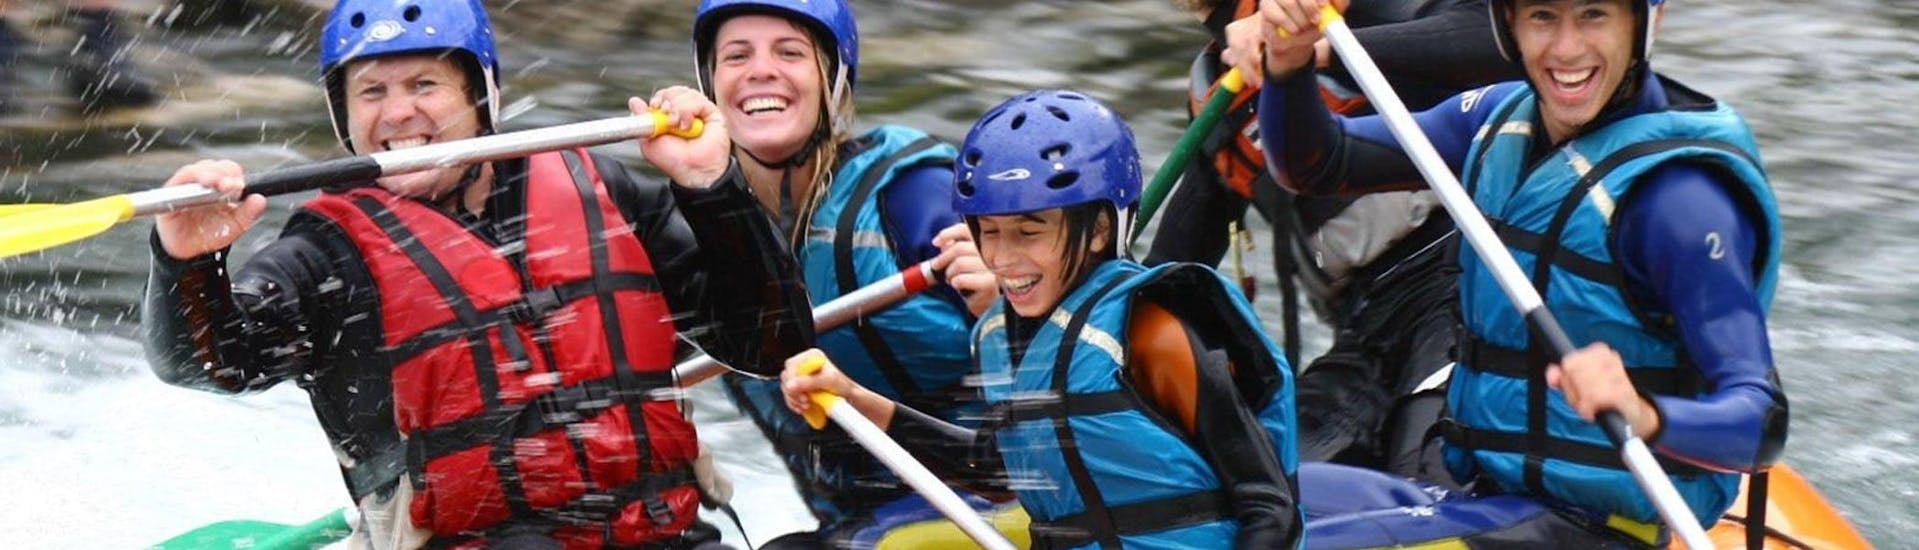 A family is having fun during their Rafting in Gave de Pau - Classic activity with Ohlala Eaux Vives.